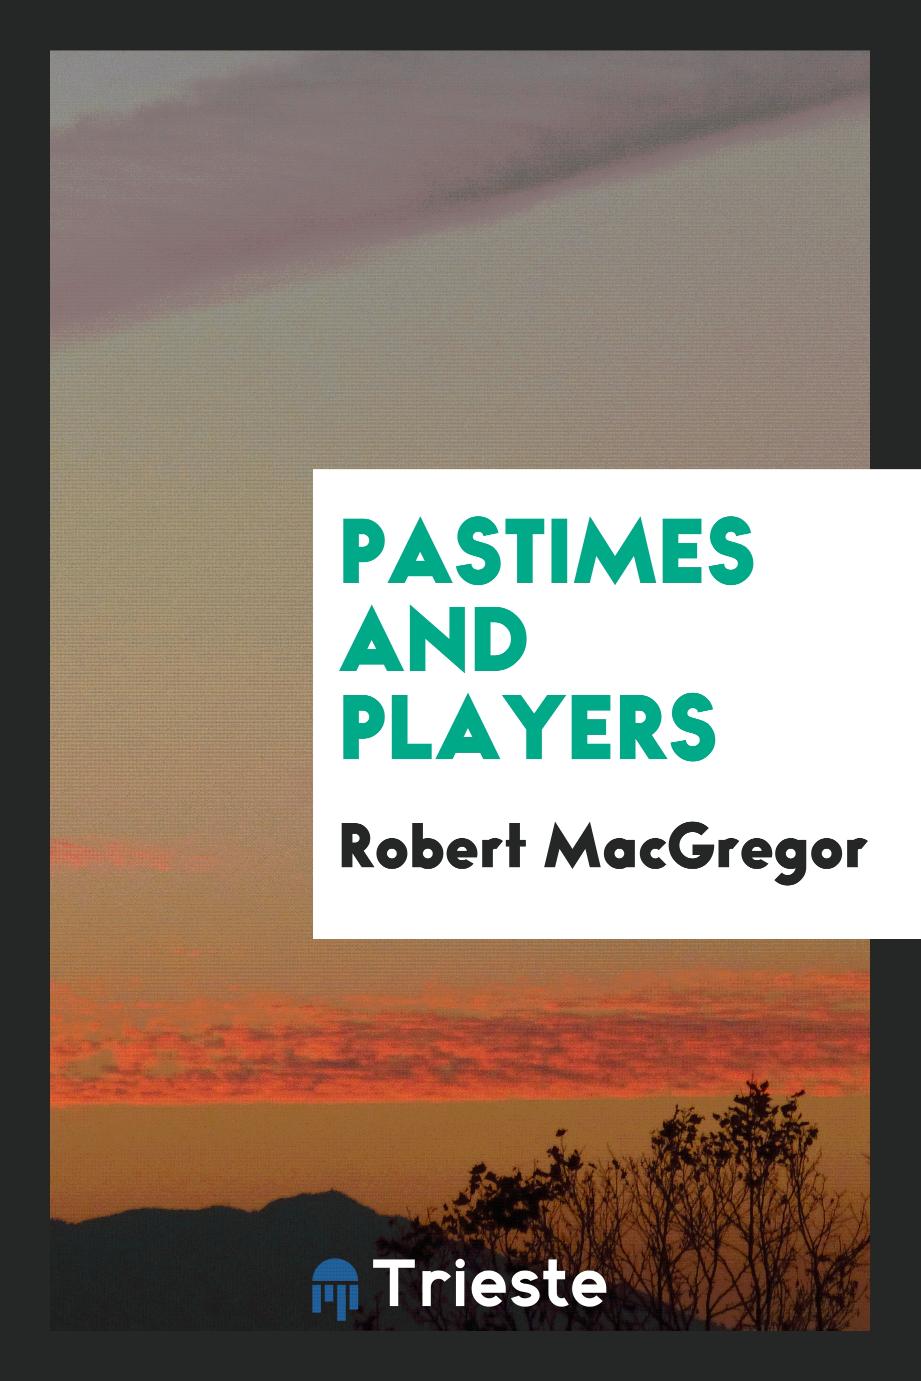 Pastimes and players